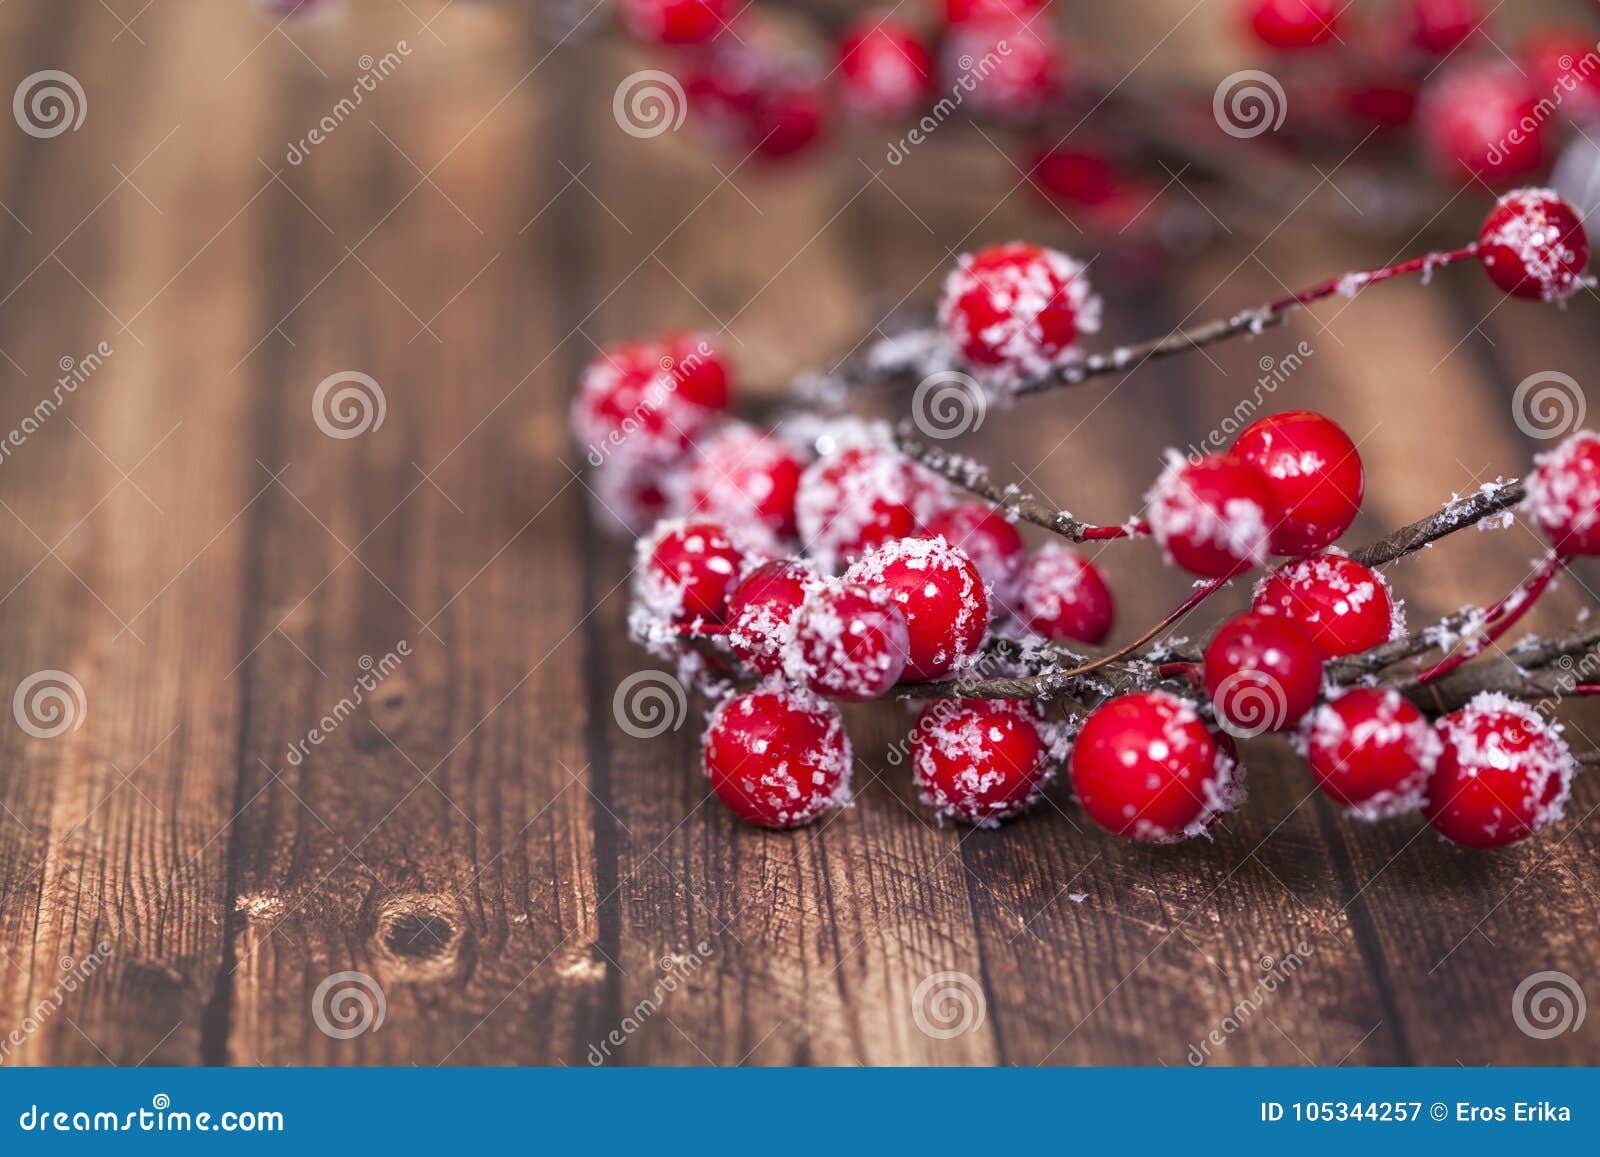 Christmas Wreath of Red Berries Stock Image - Image of merry, natural ...